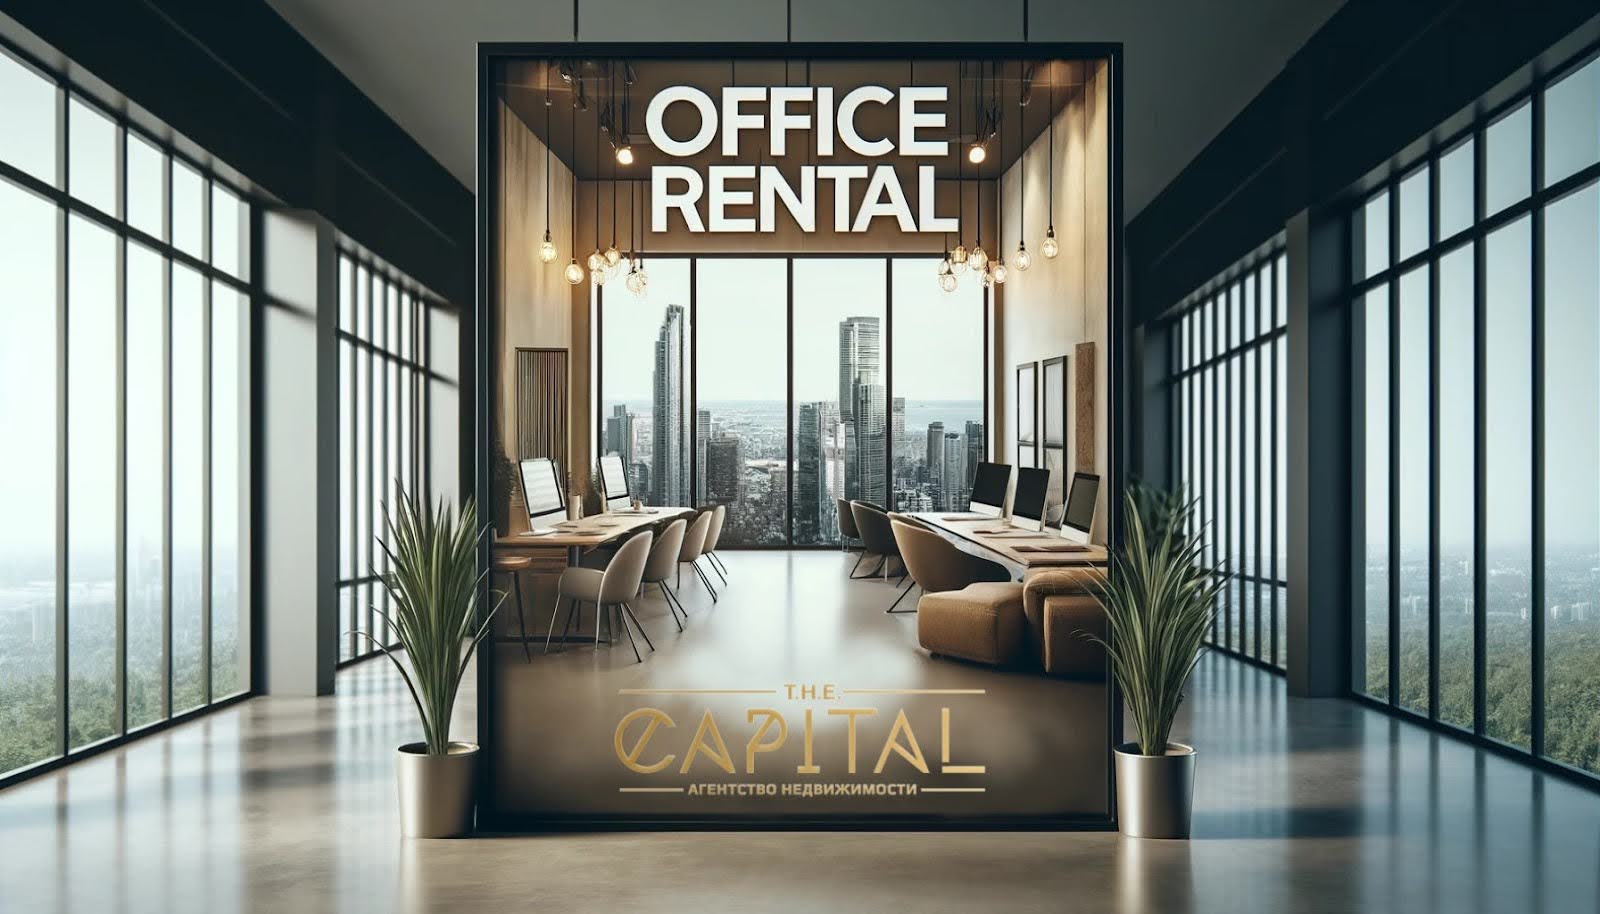 Office for rent with an advertising banner in the center